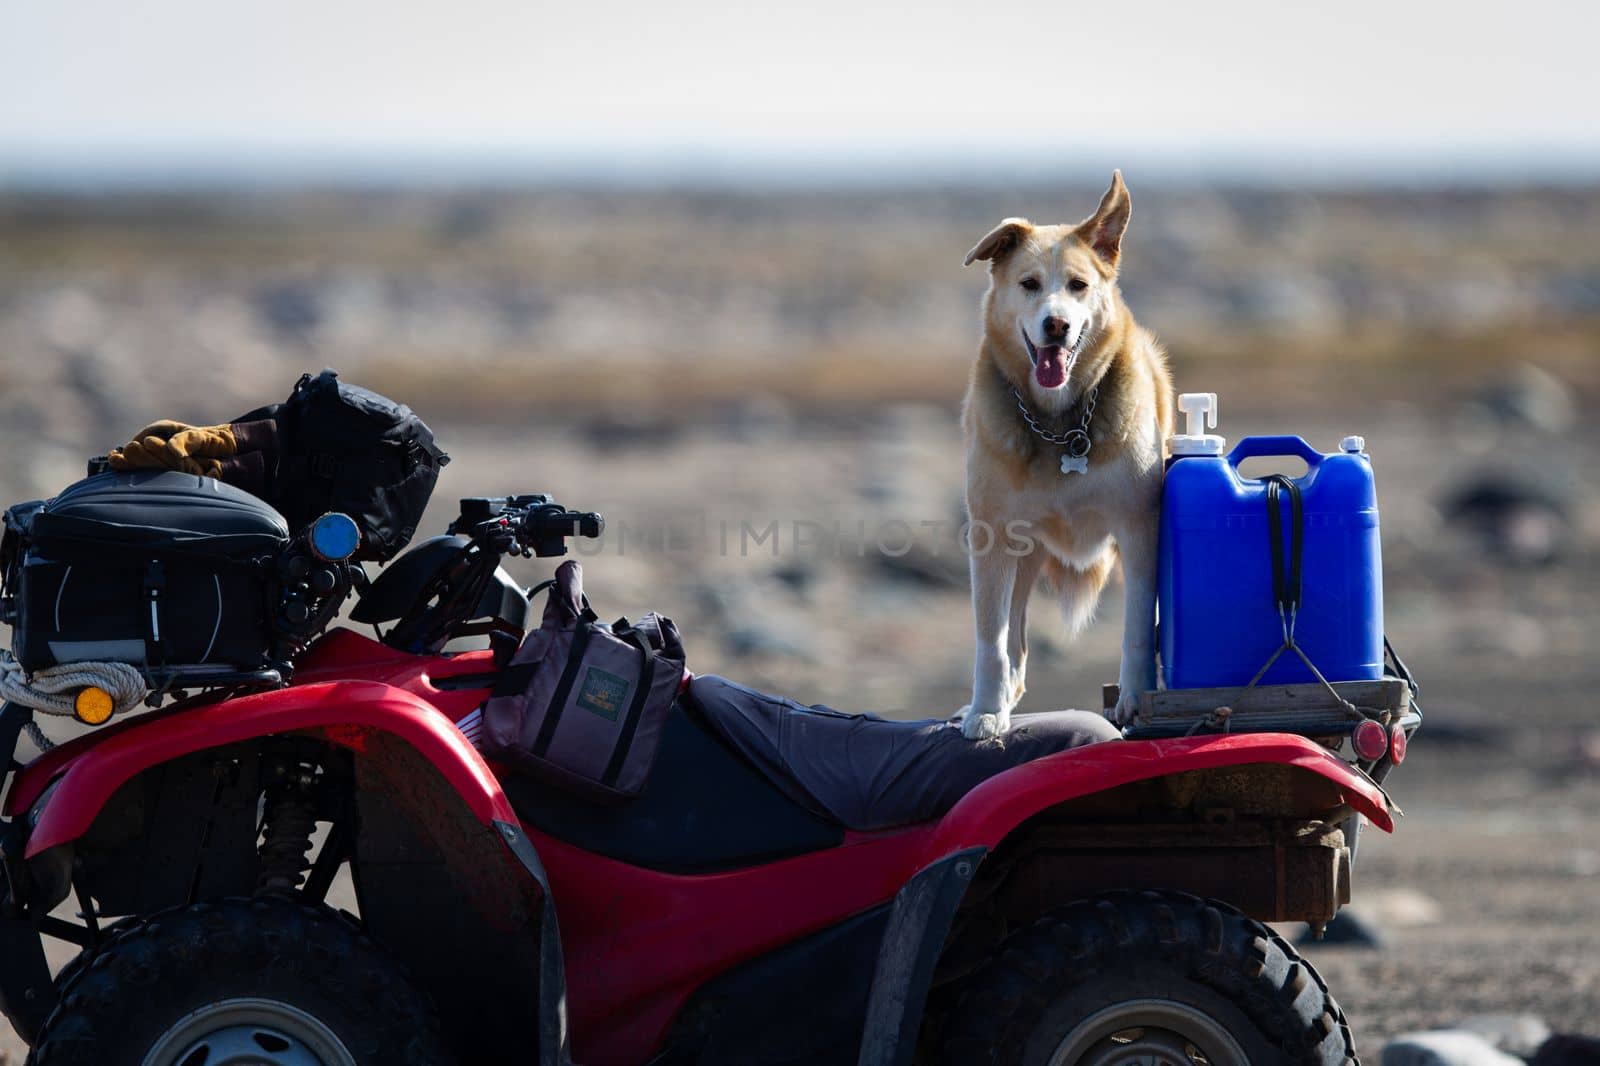 A yellow Labrador dog stands on an all-terrain vehicle or quad or ATV ready to go riding